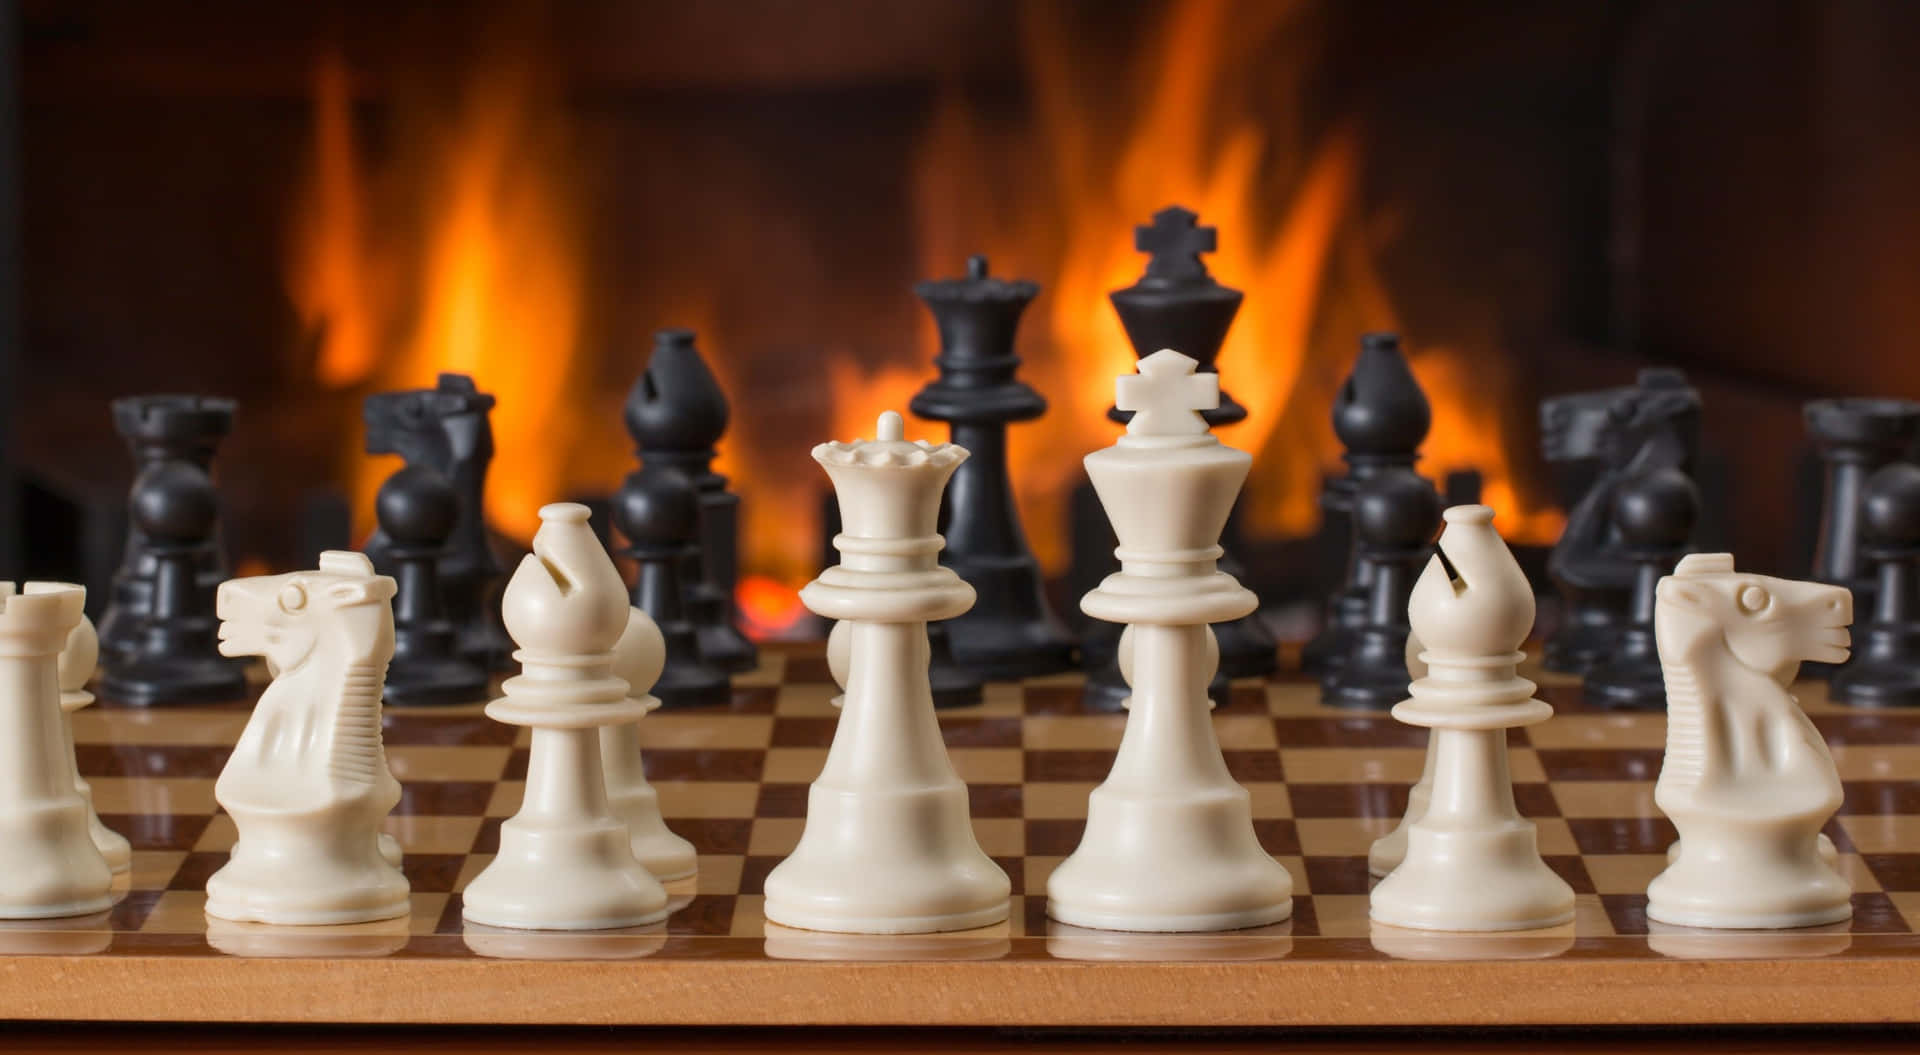 Chess Pieces On A Wooden Board In Front Of A Fireplace